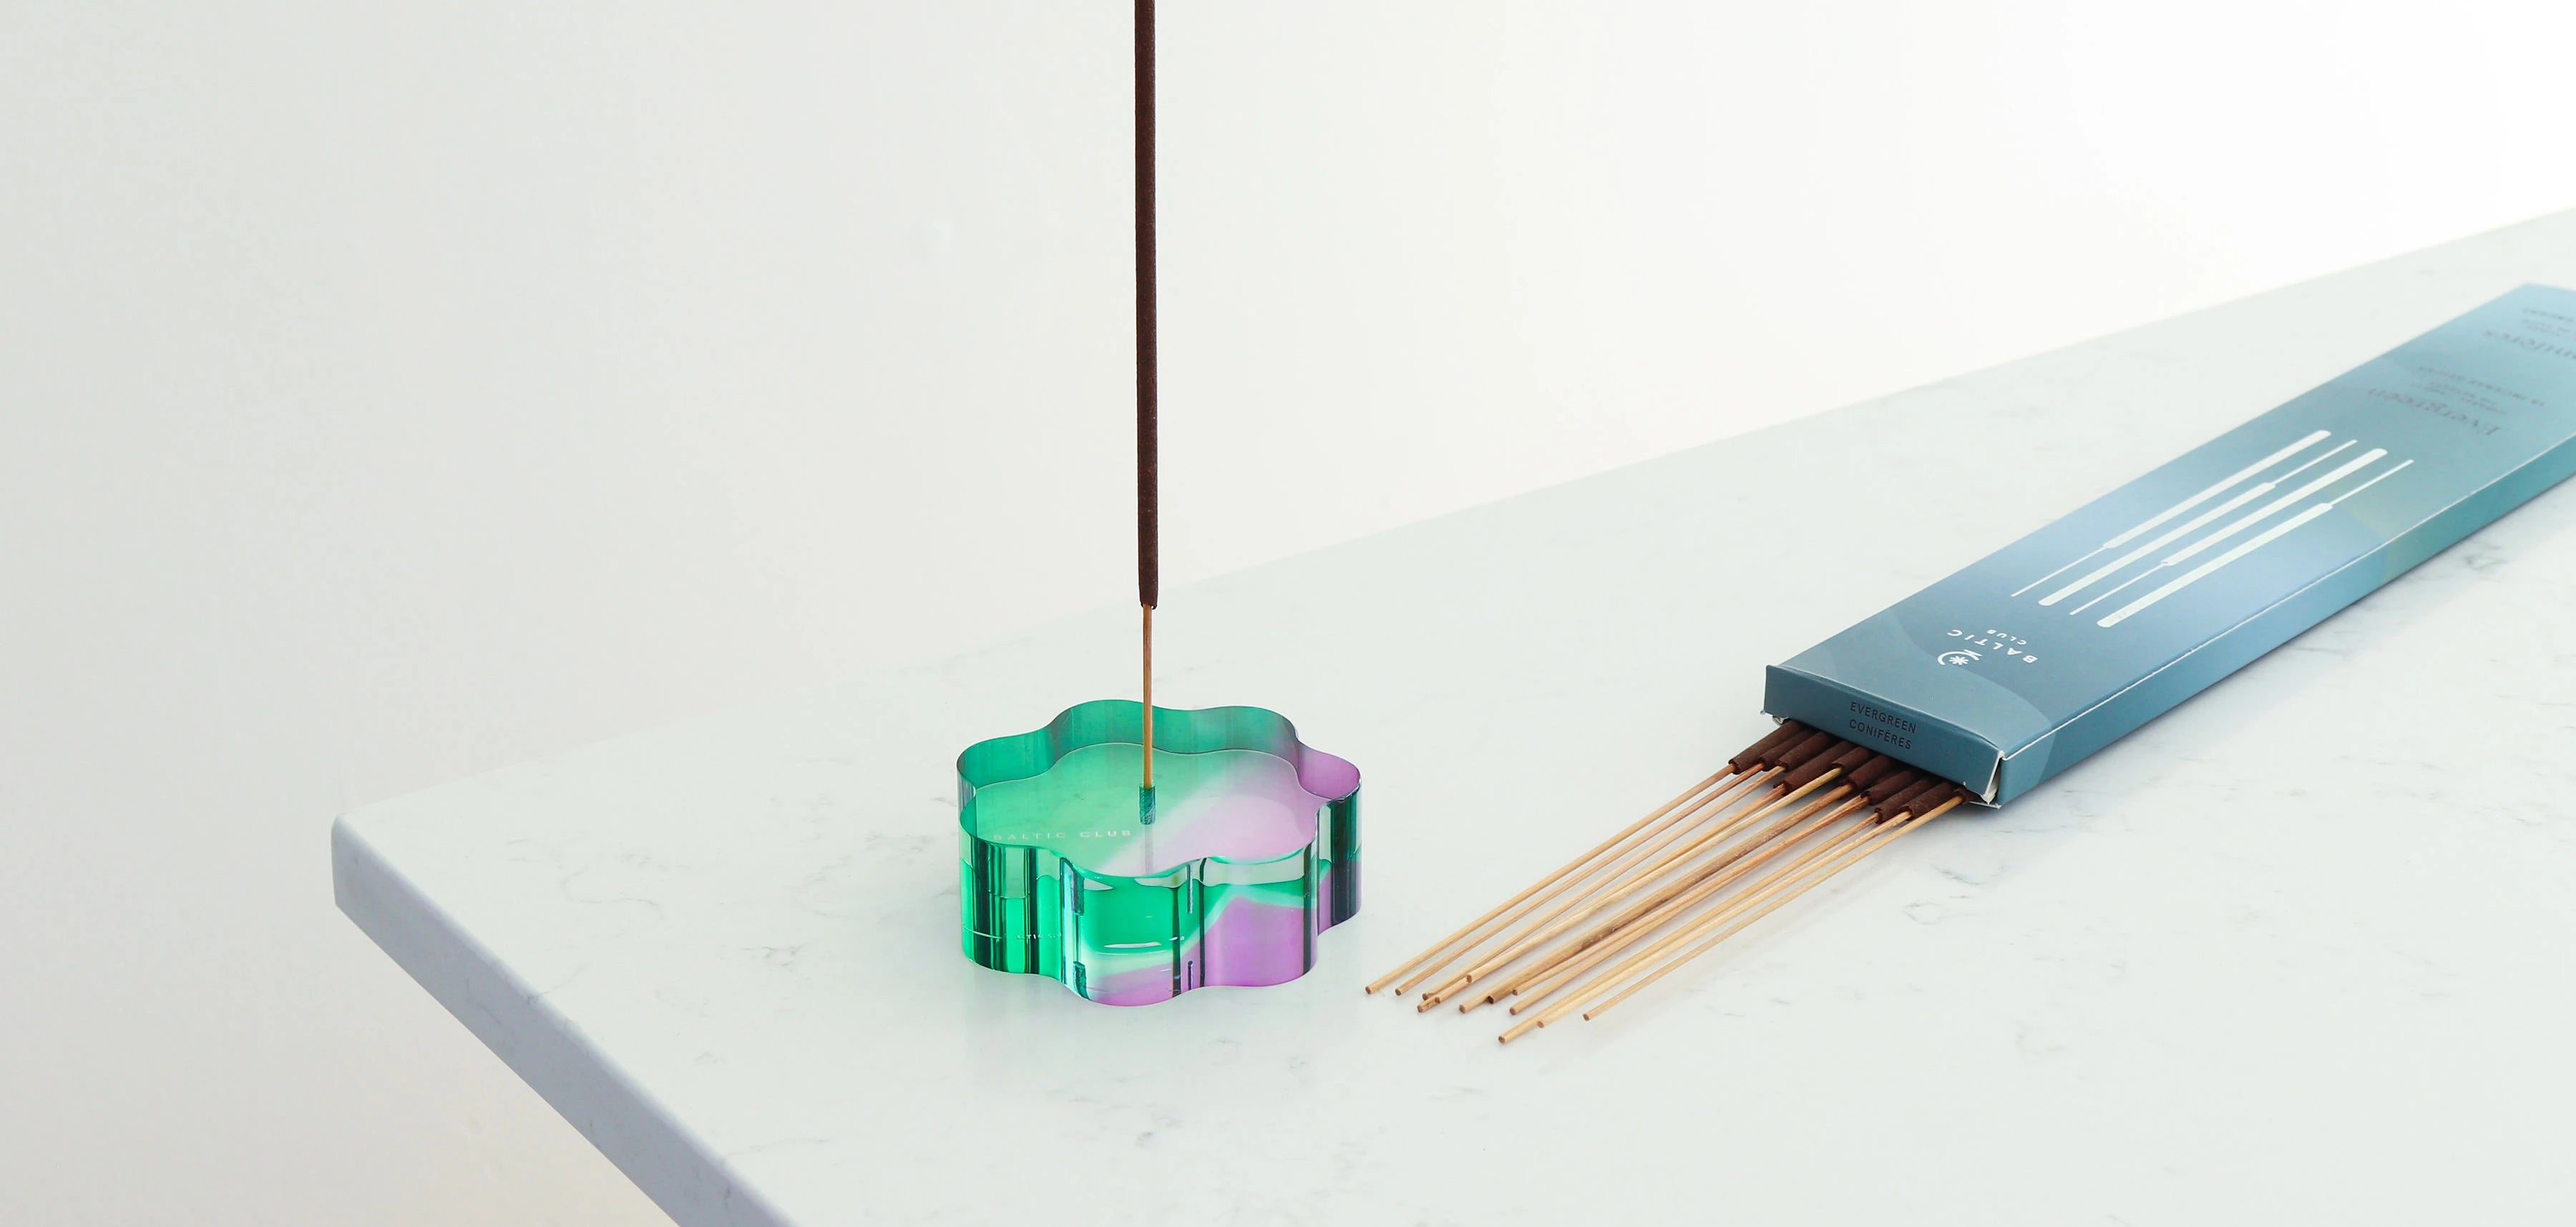 Discover our Incense Sticks, Incense Holders and Bundles